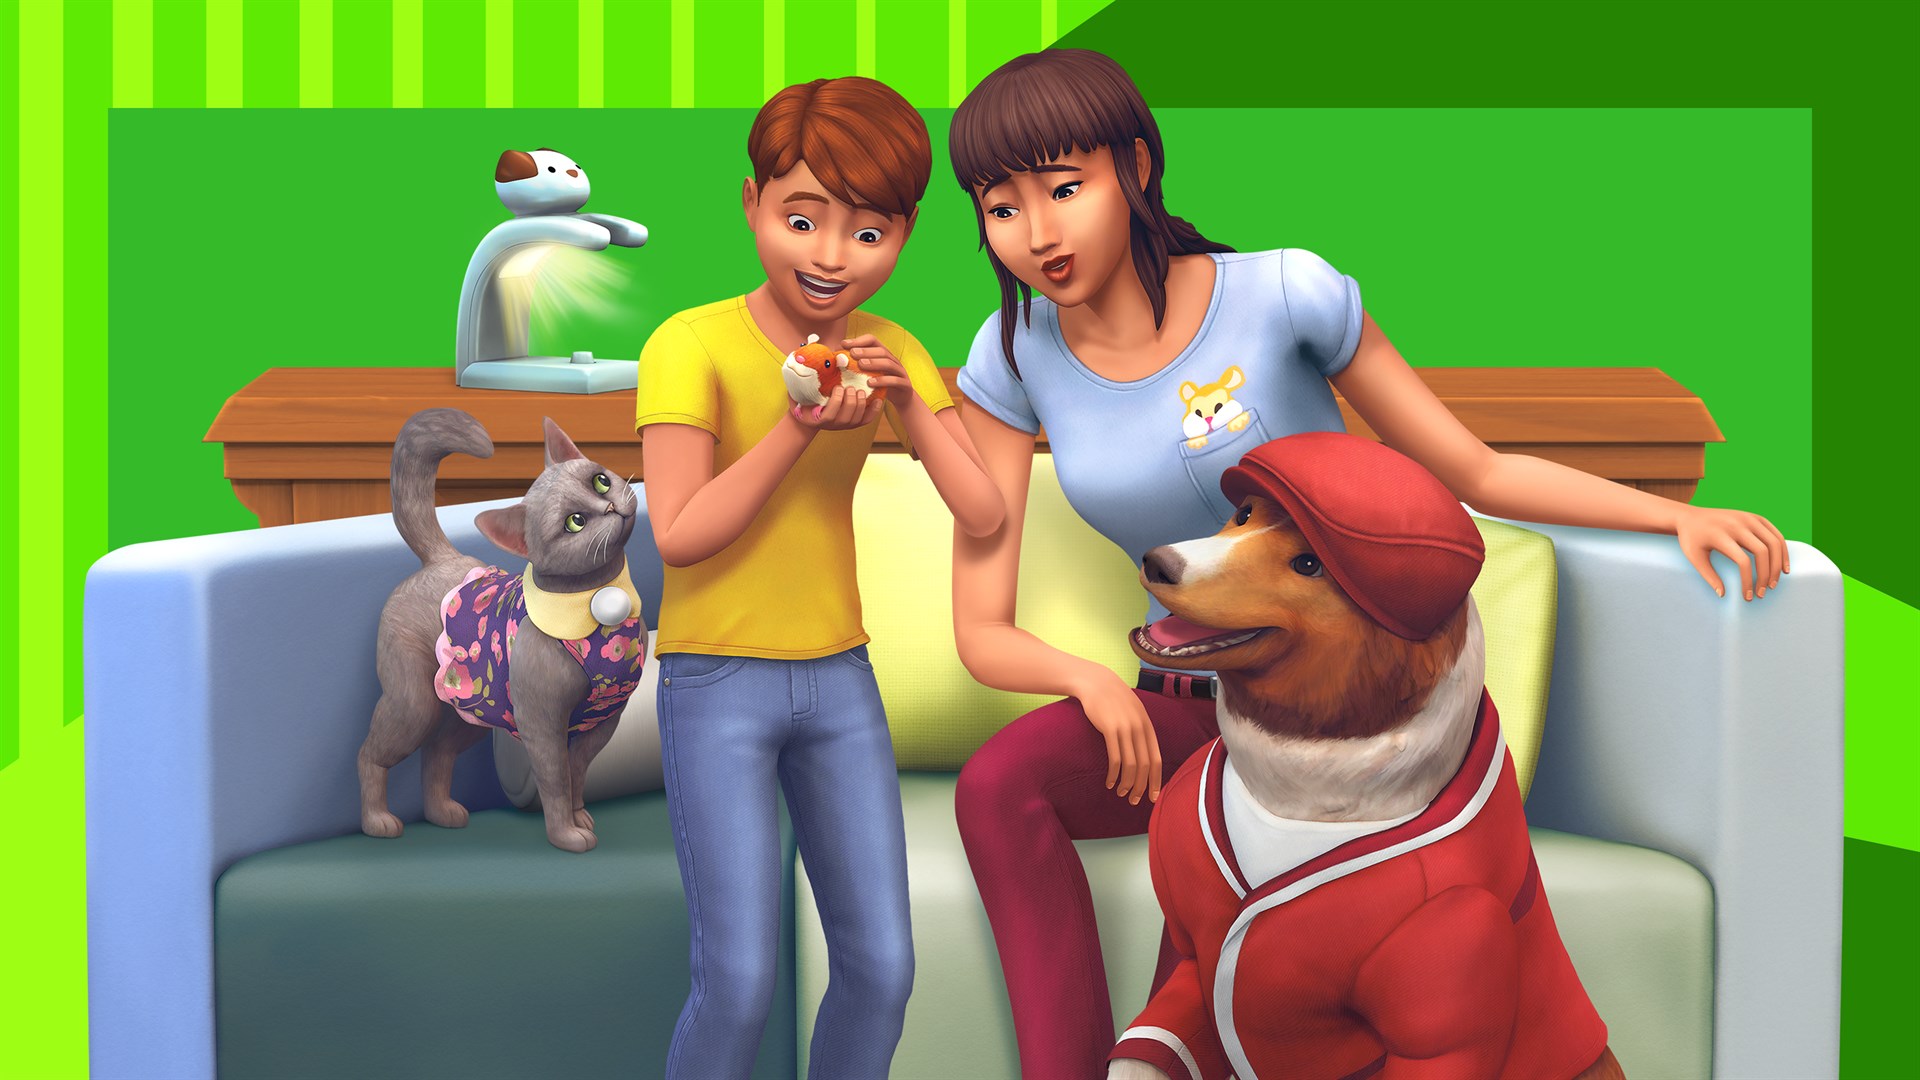 My First Pet Stuff is FREE on EA App for PC/Mac! : r/Sims4